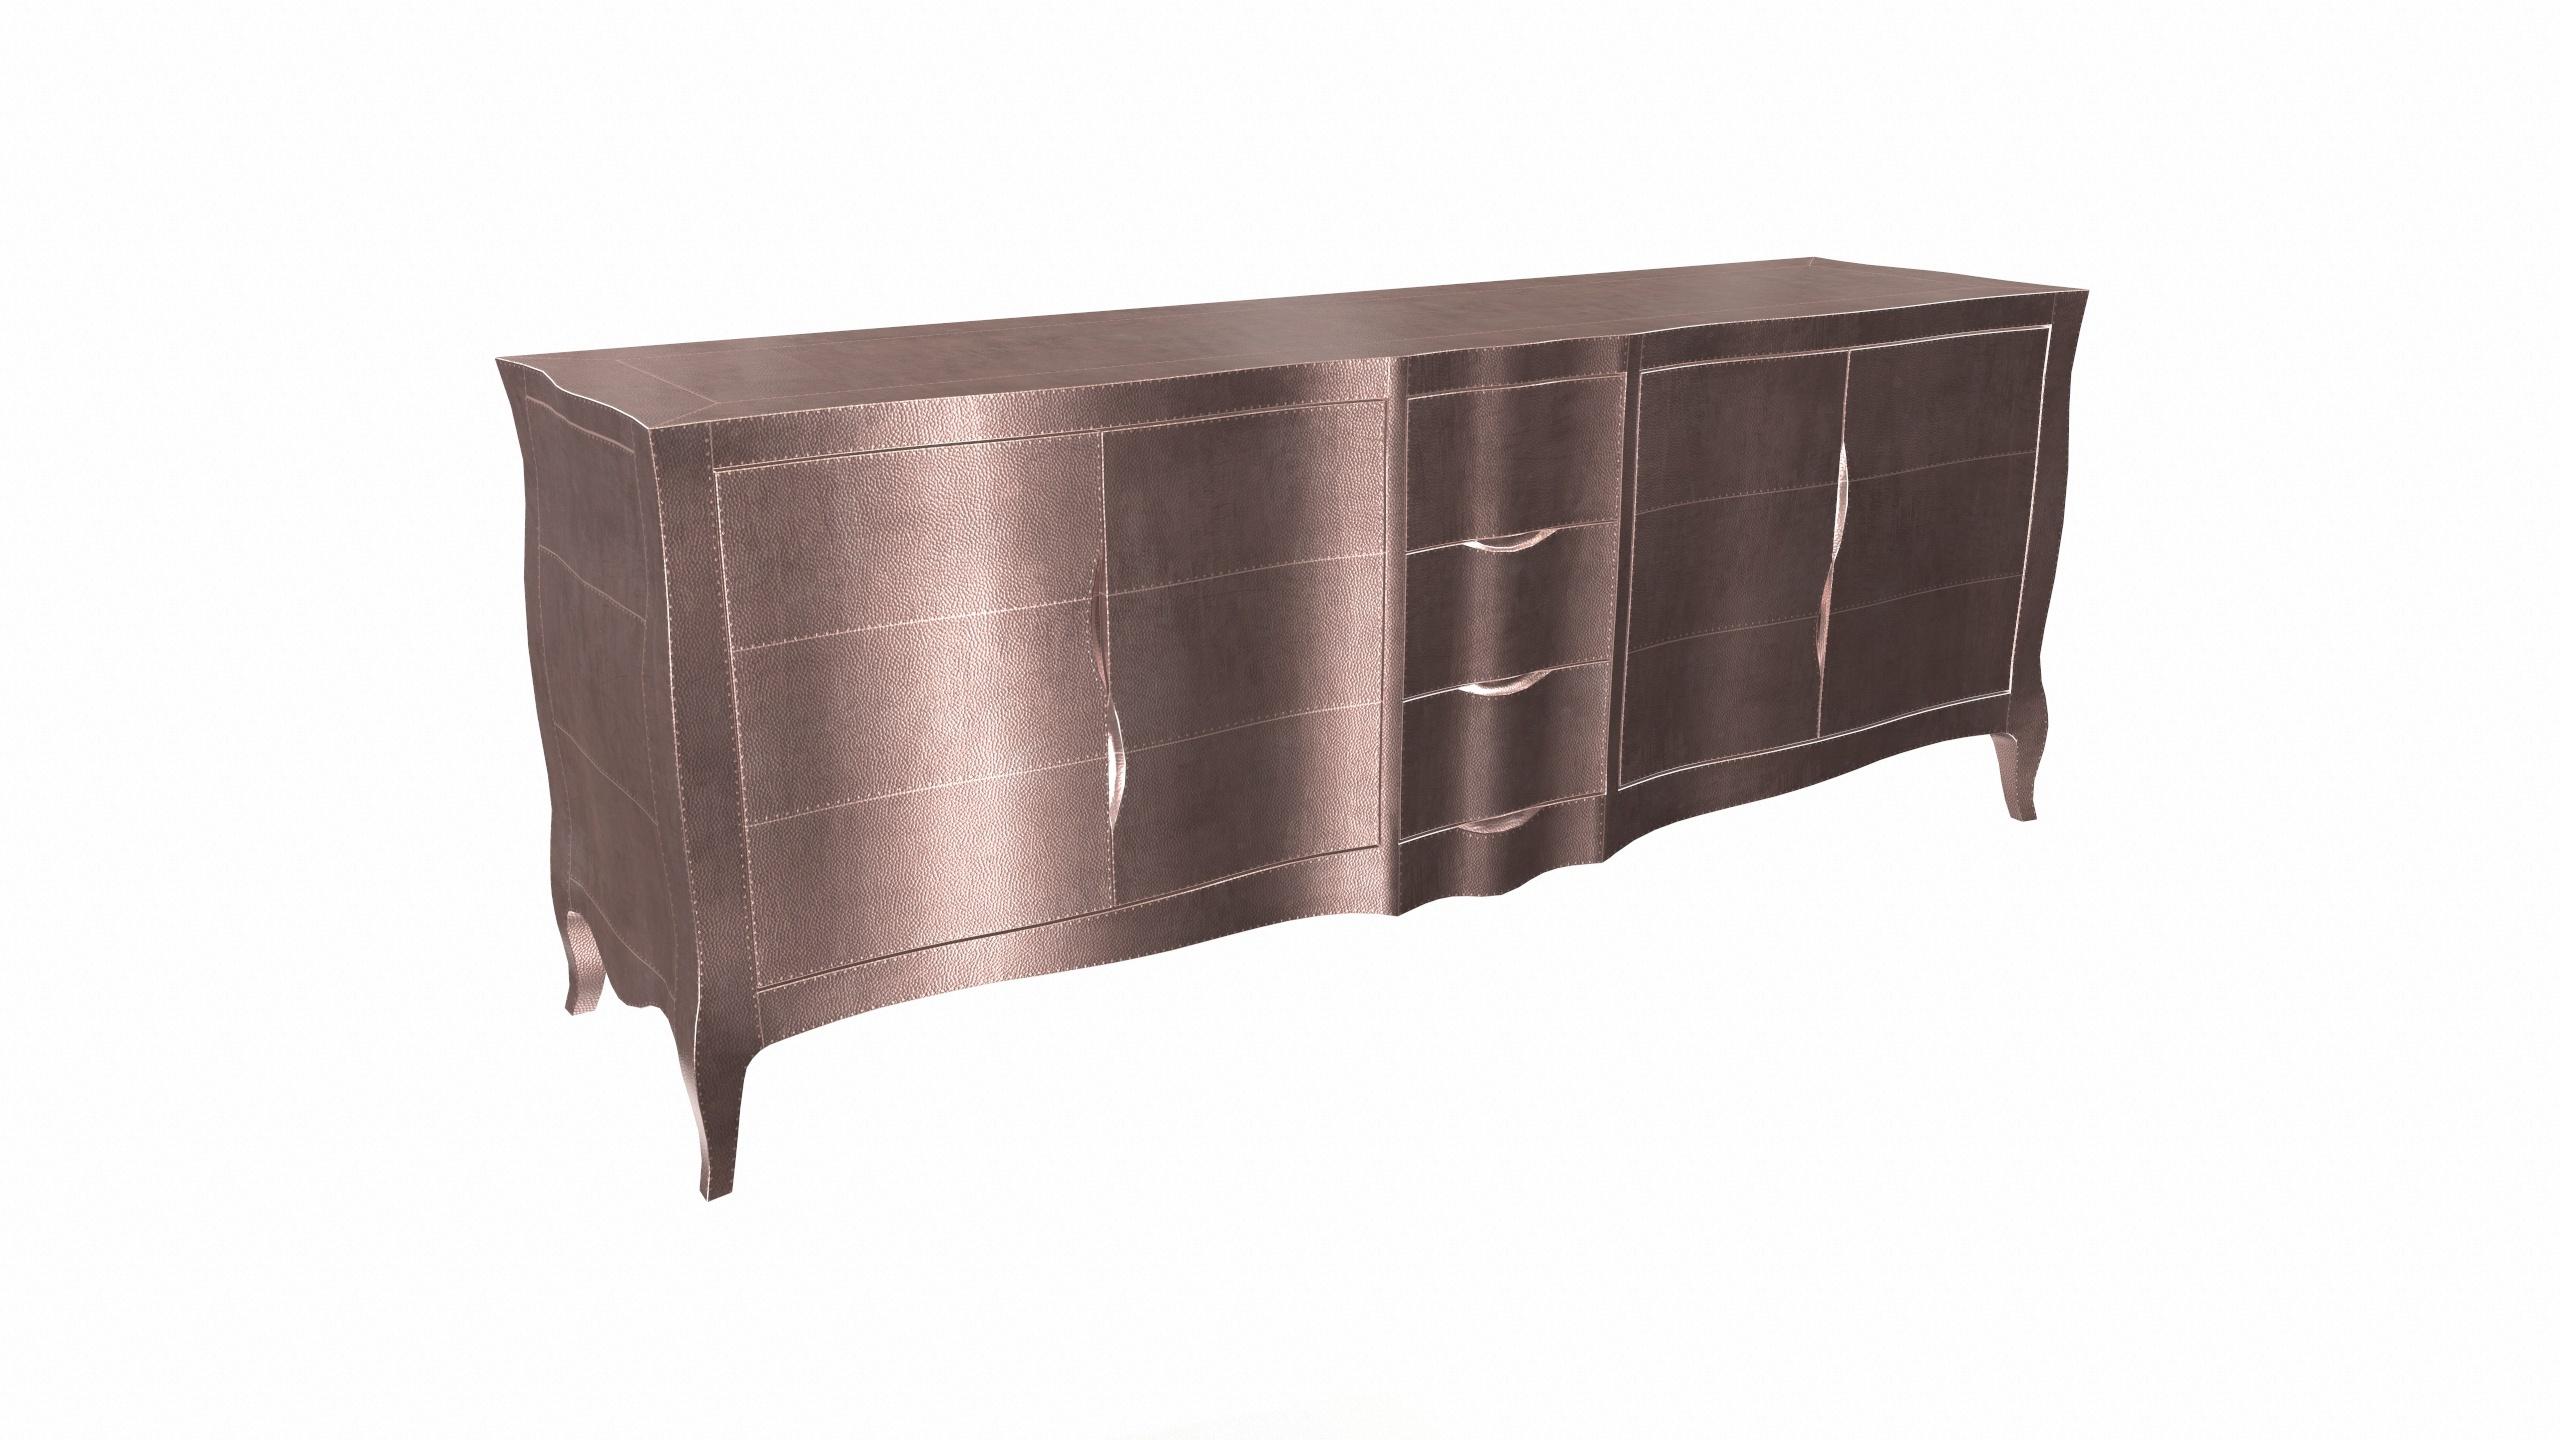 Contemporary Louise Credenza Art Deco Credenzas in Mid. Hammered Copper by Paul Mathieu For Sale